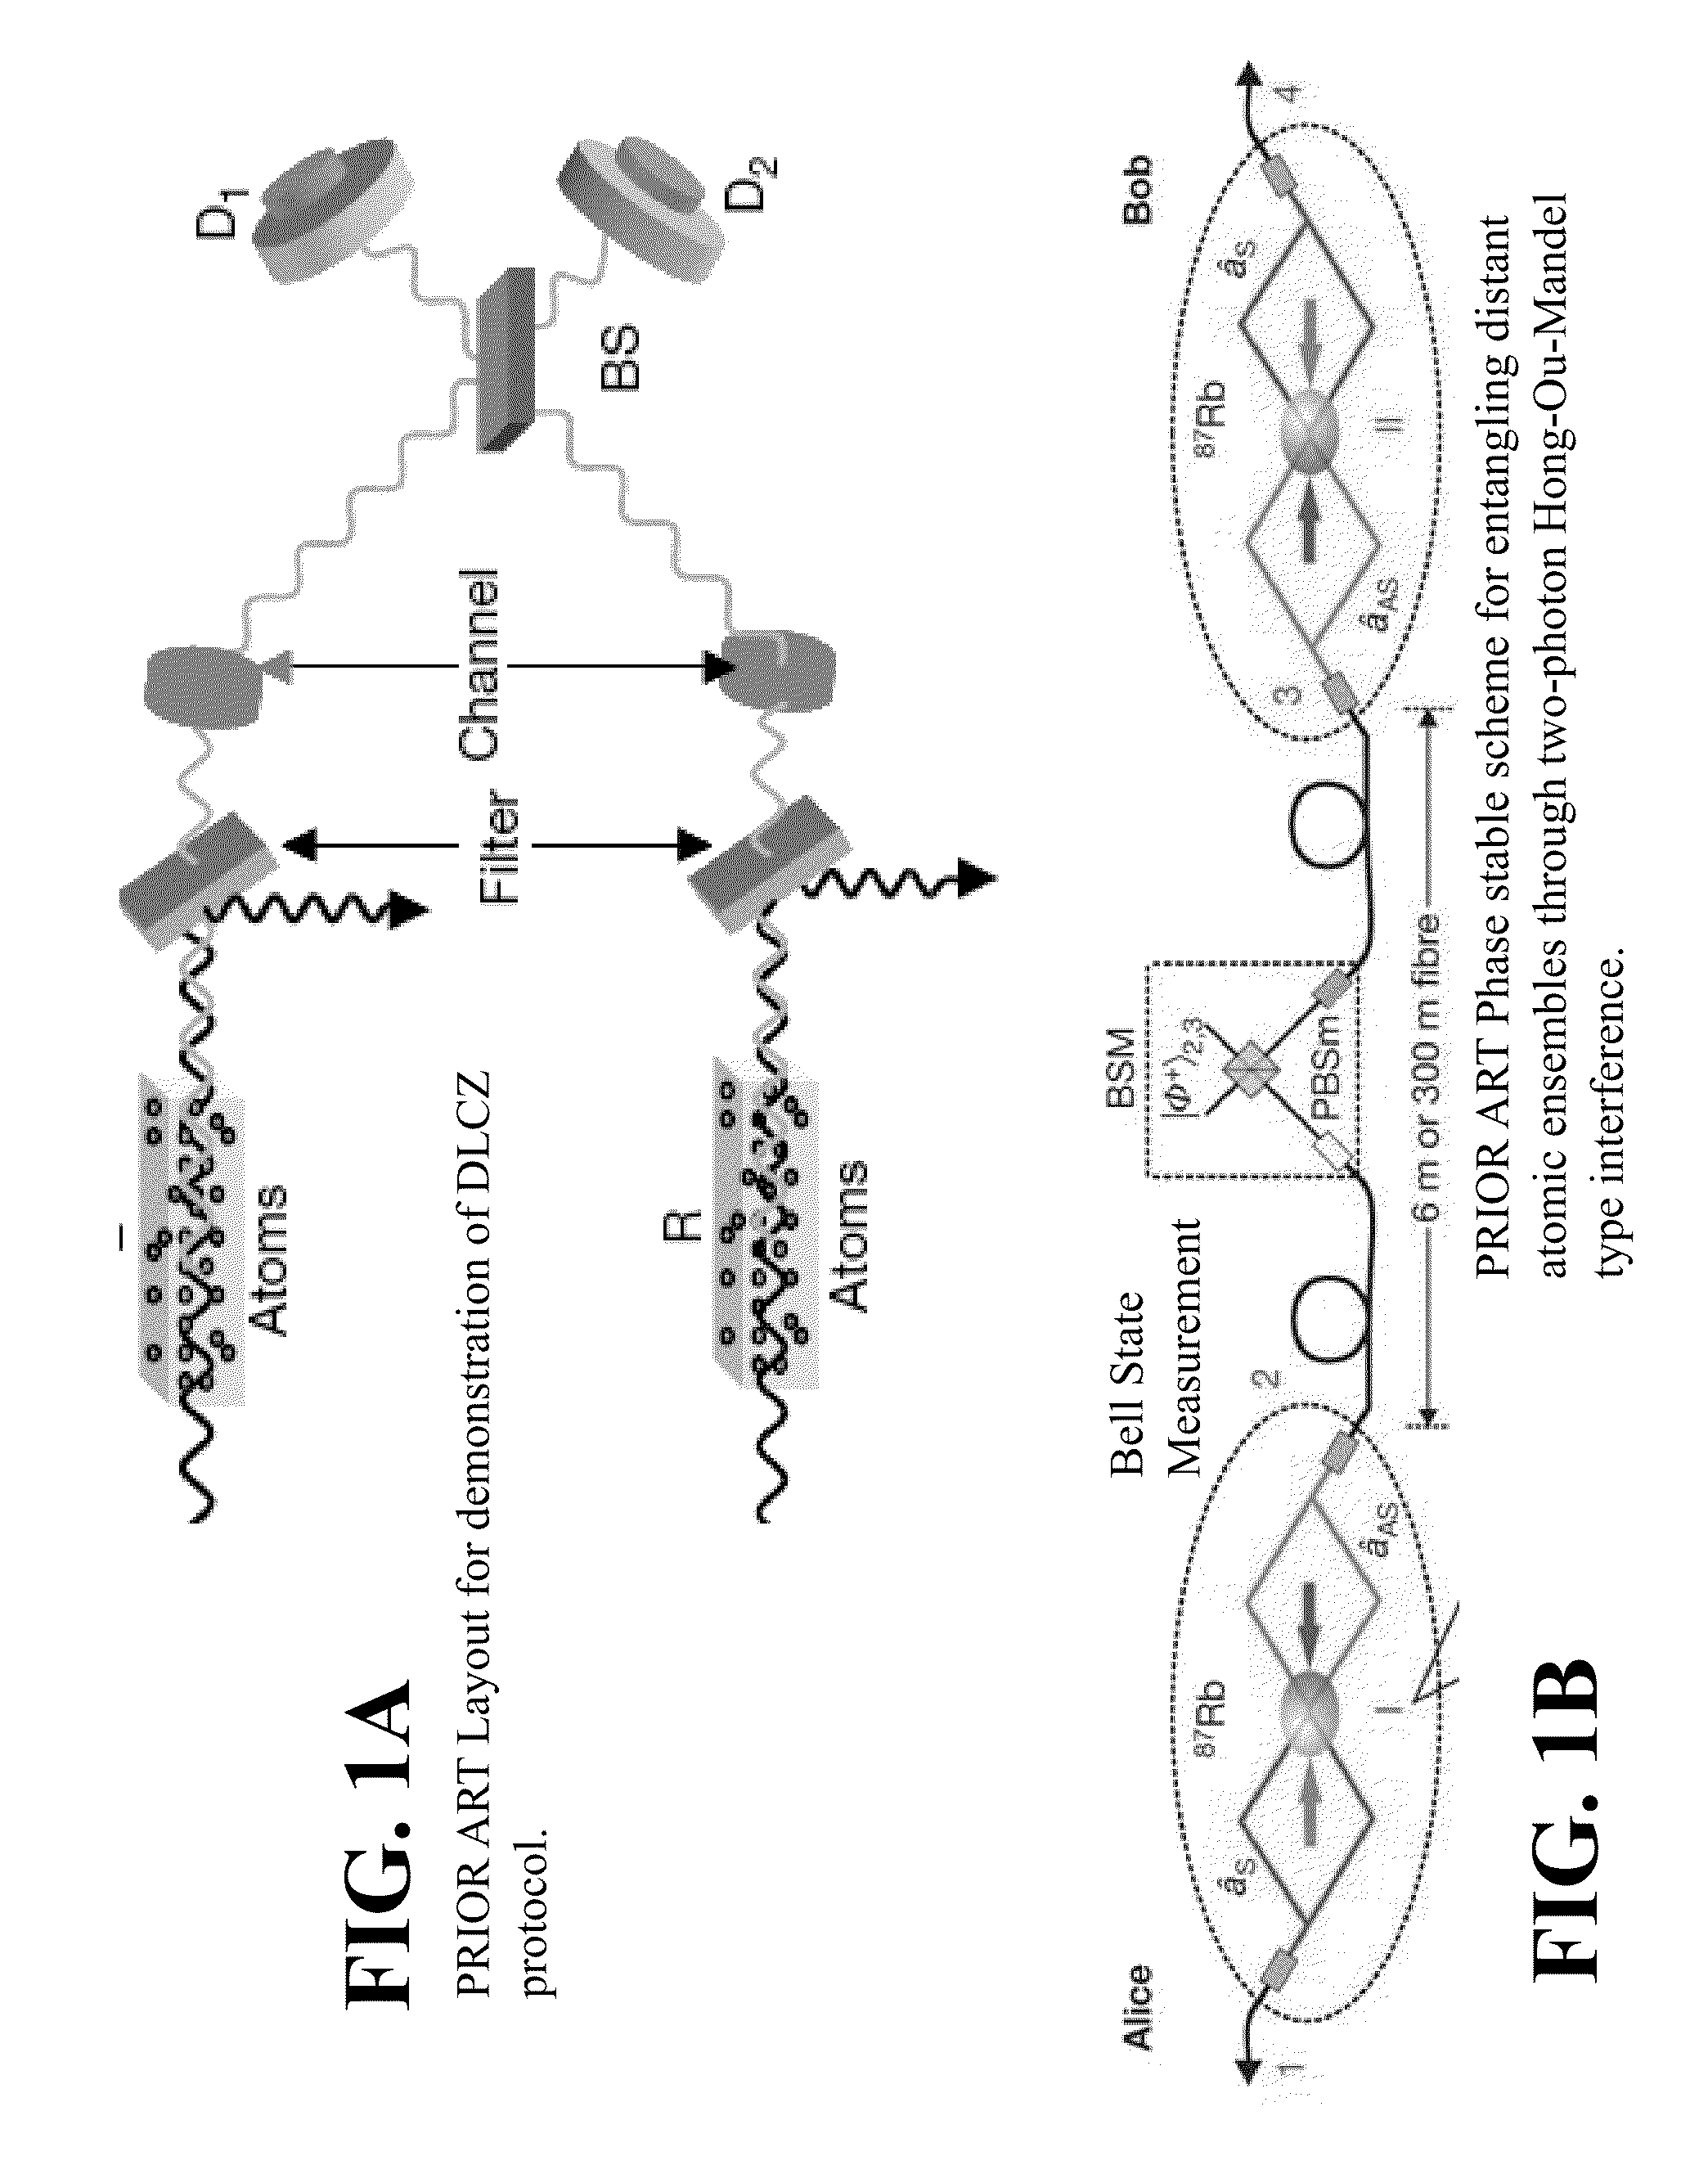 System and method for quantum based information transfer